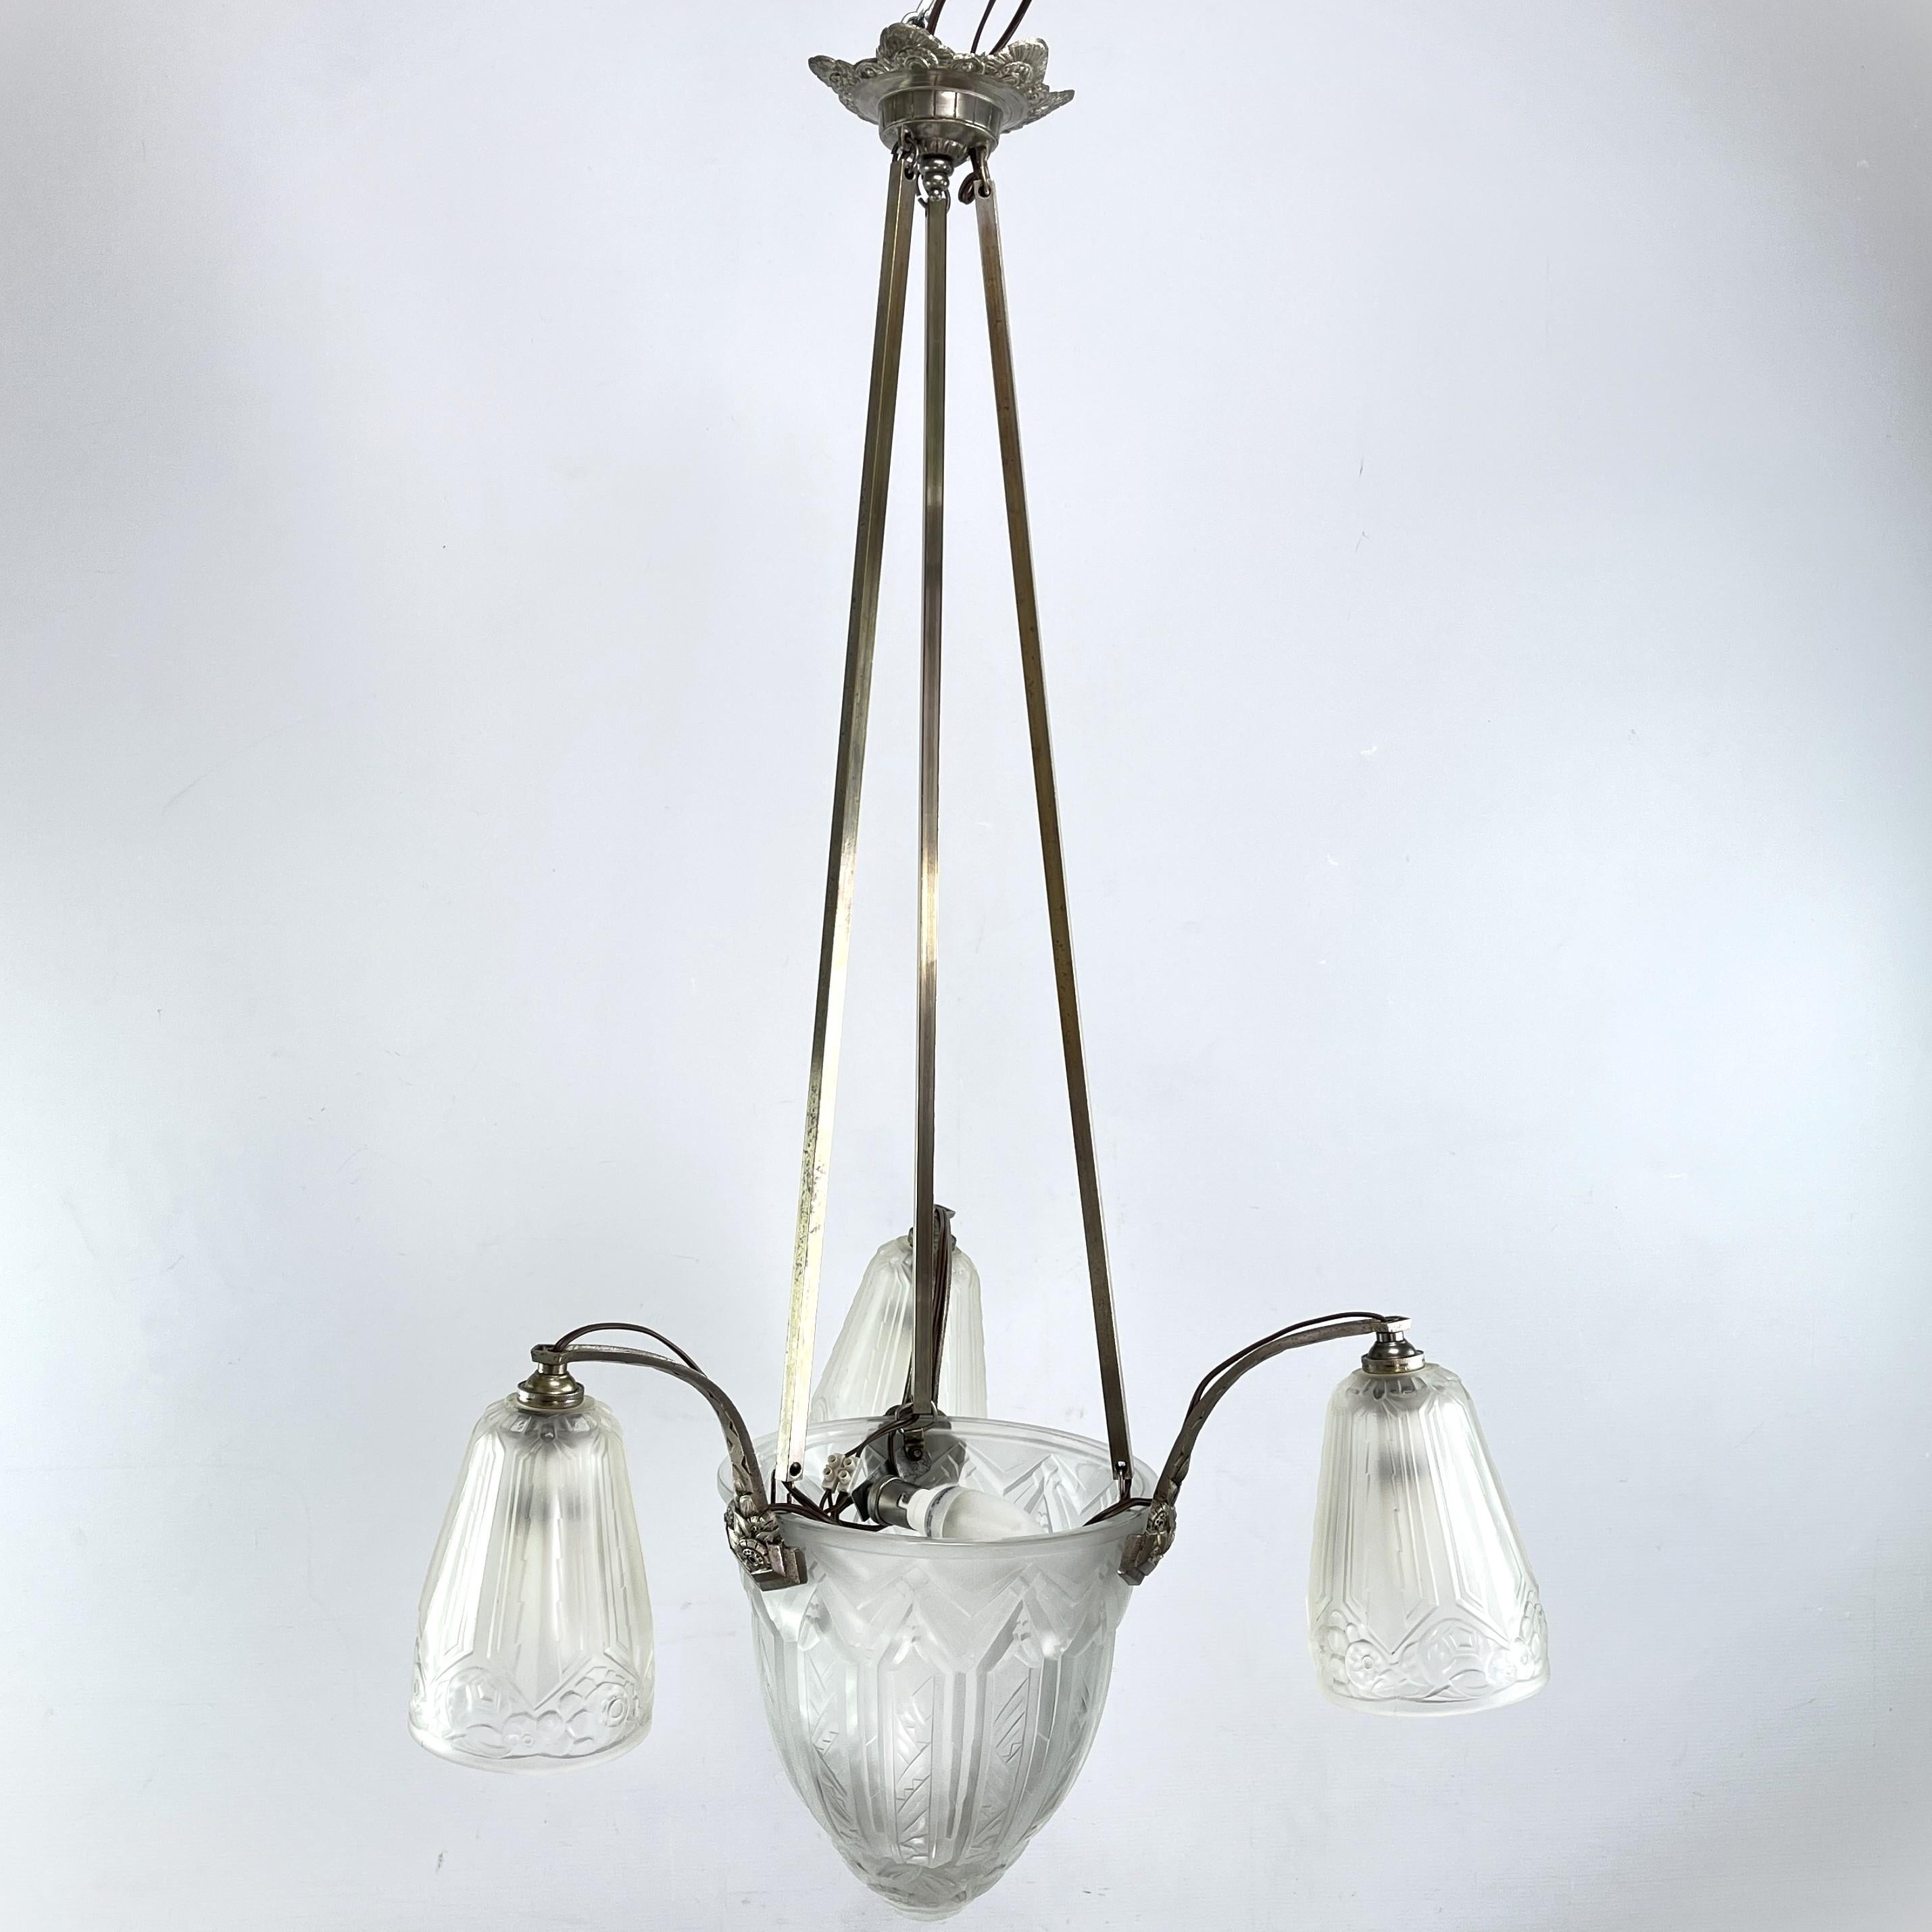 20th Century Art Deco Chandelier Hanging Lamp by Maynadier, 1930s For Sale